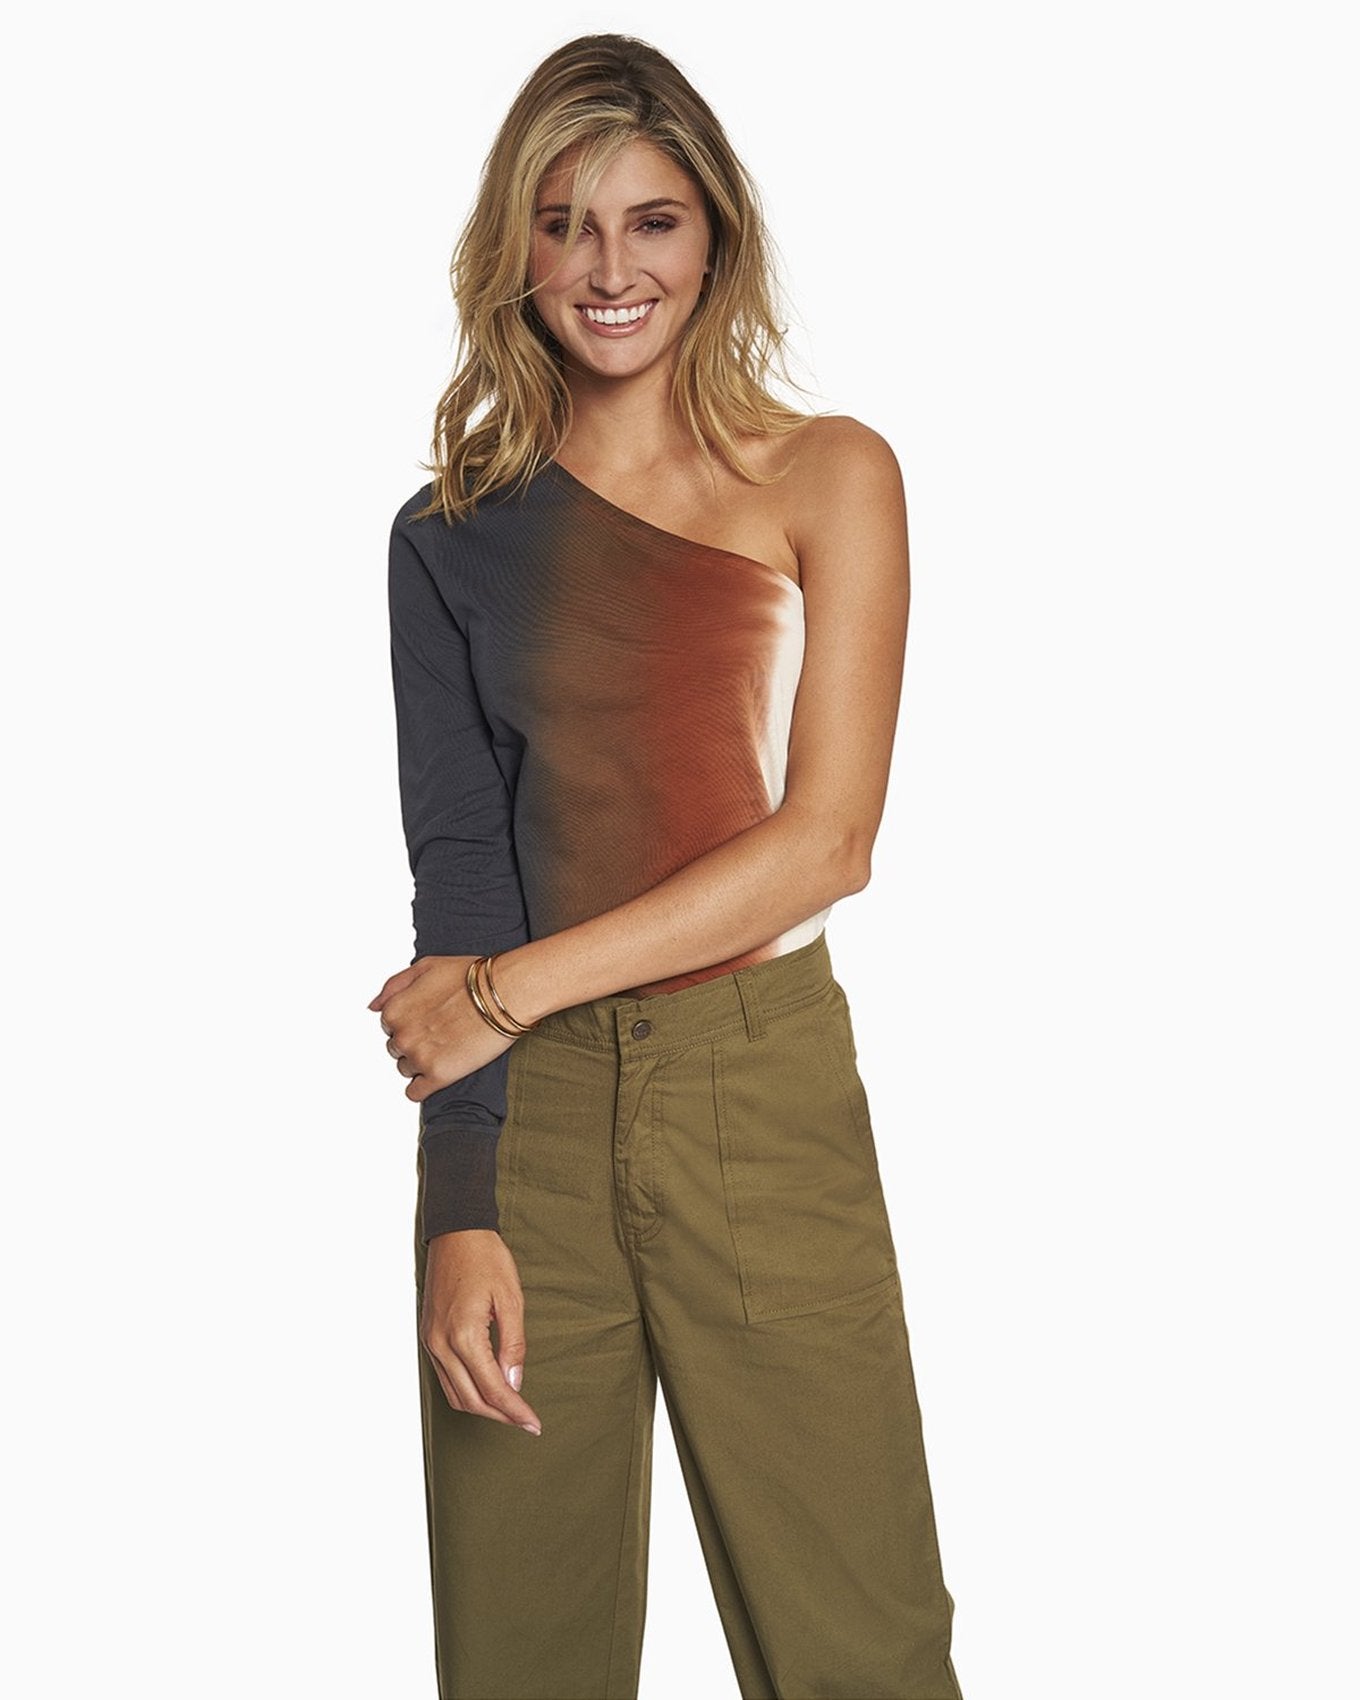 YesAnd Organic Utility Pant Pant in color Olive Branch and shape pants